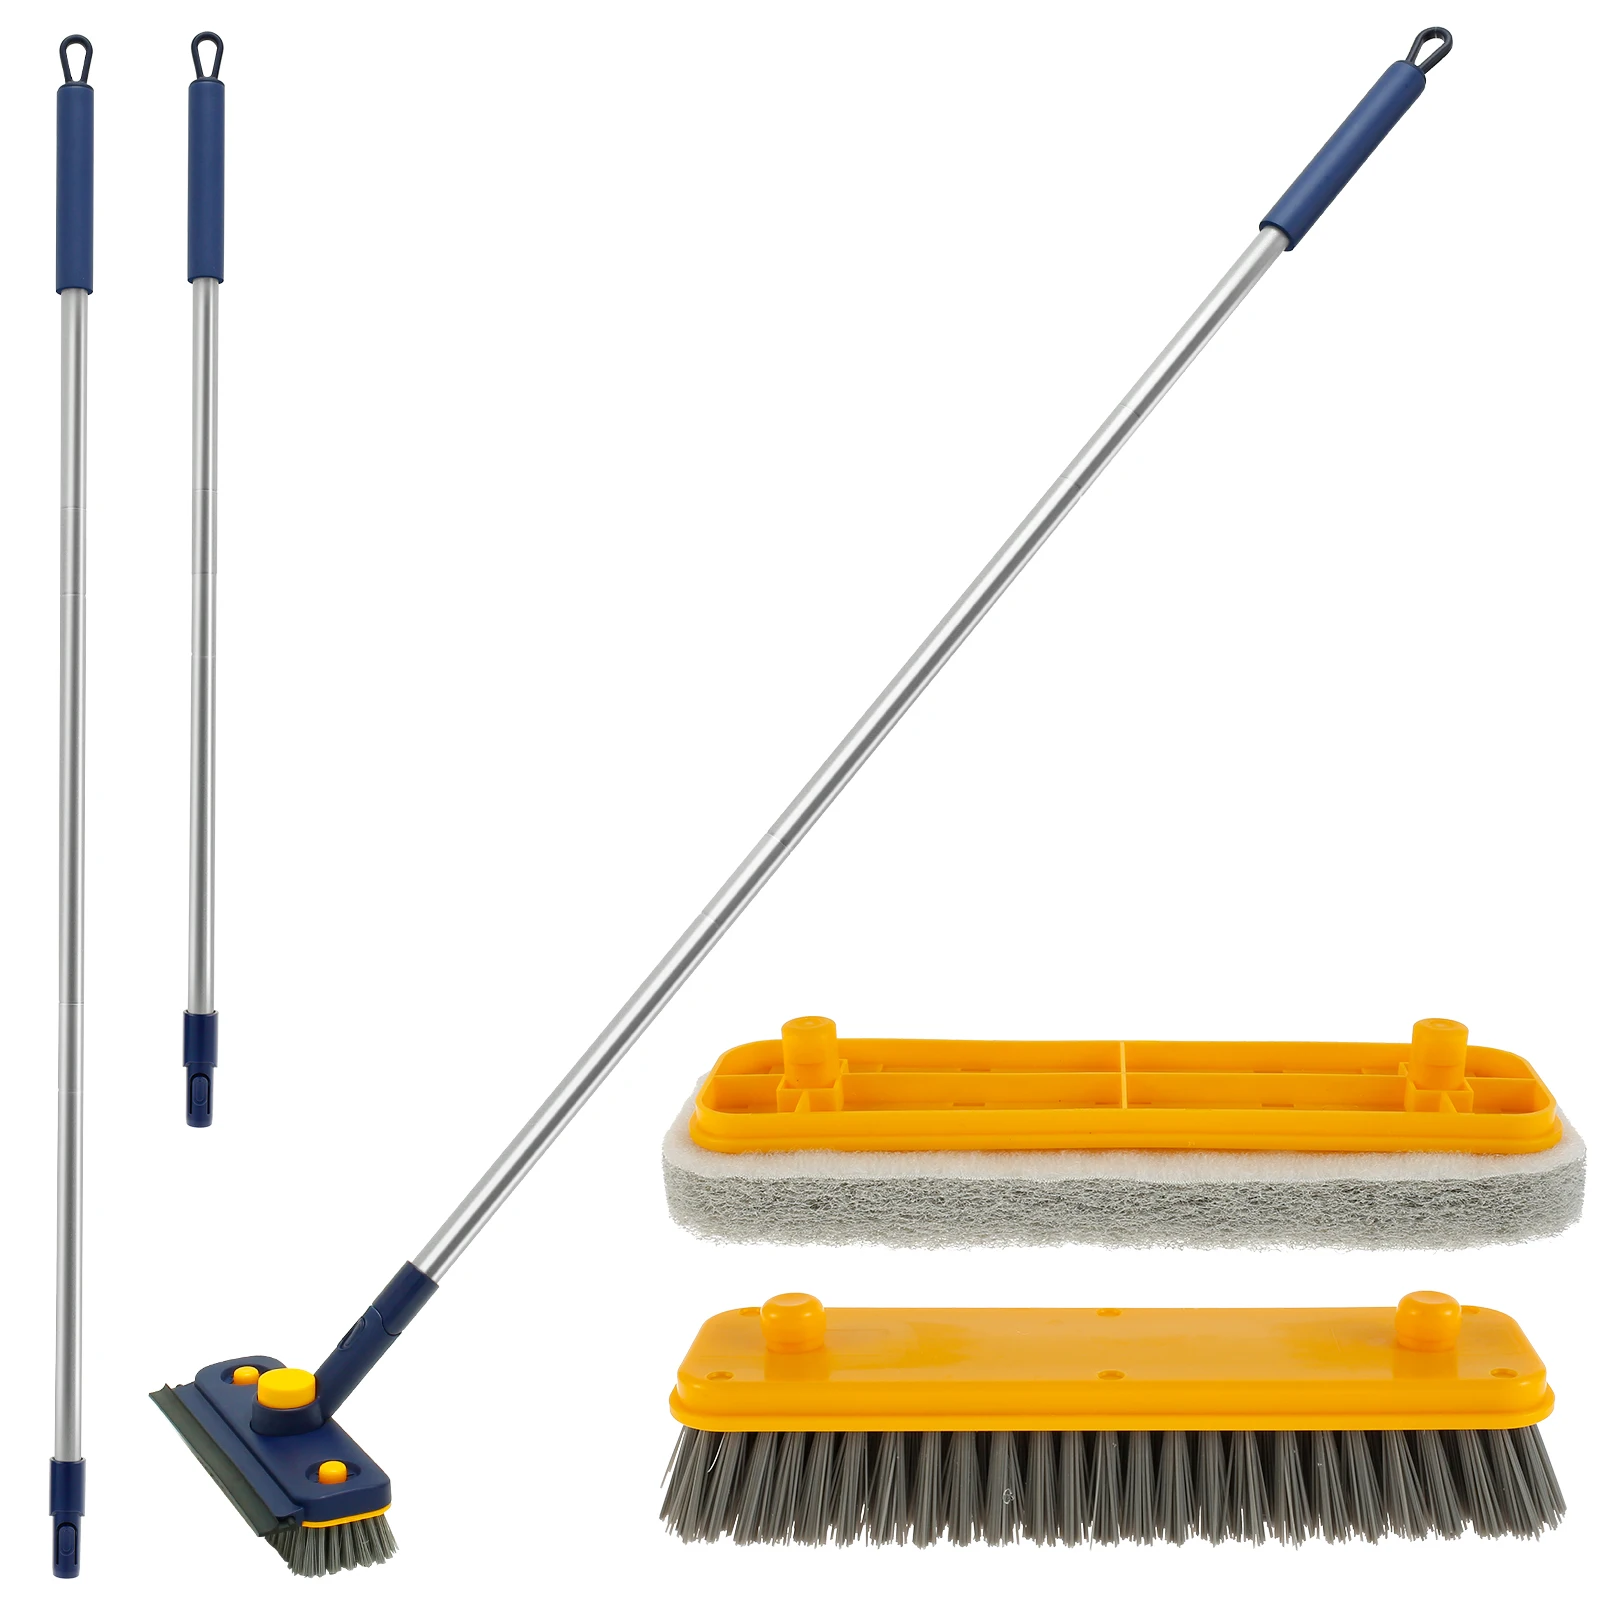 https://ae01.alicdn.com/kf/S1797c0f2286a4524839a377c02c8ba04k/Long-Handle-Scrub-Brush-3-in-1-Tub-Tile-Scrubber-with-Extendable-Long-Handle-Stiff-Bristle.jpg